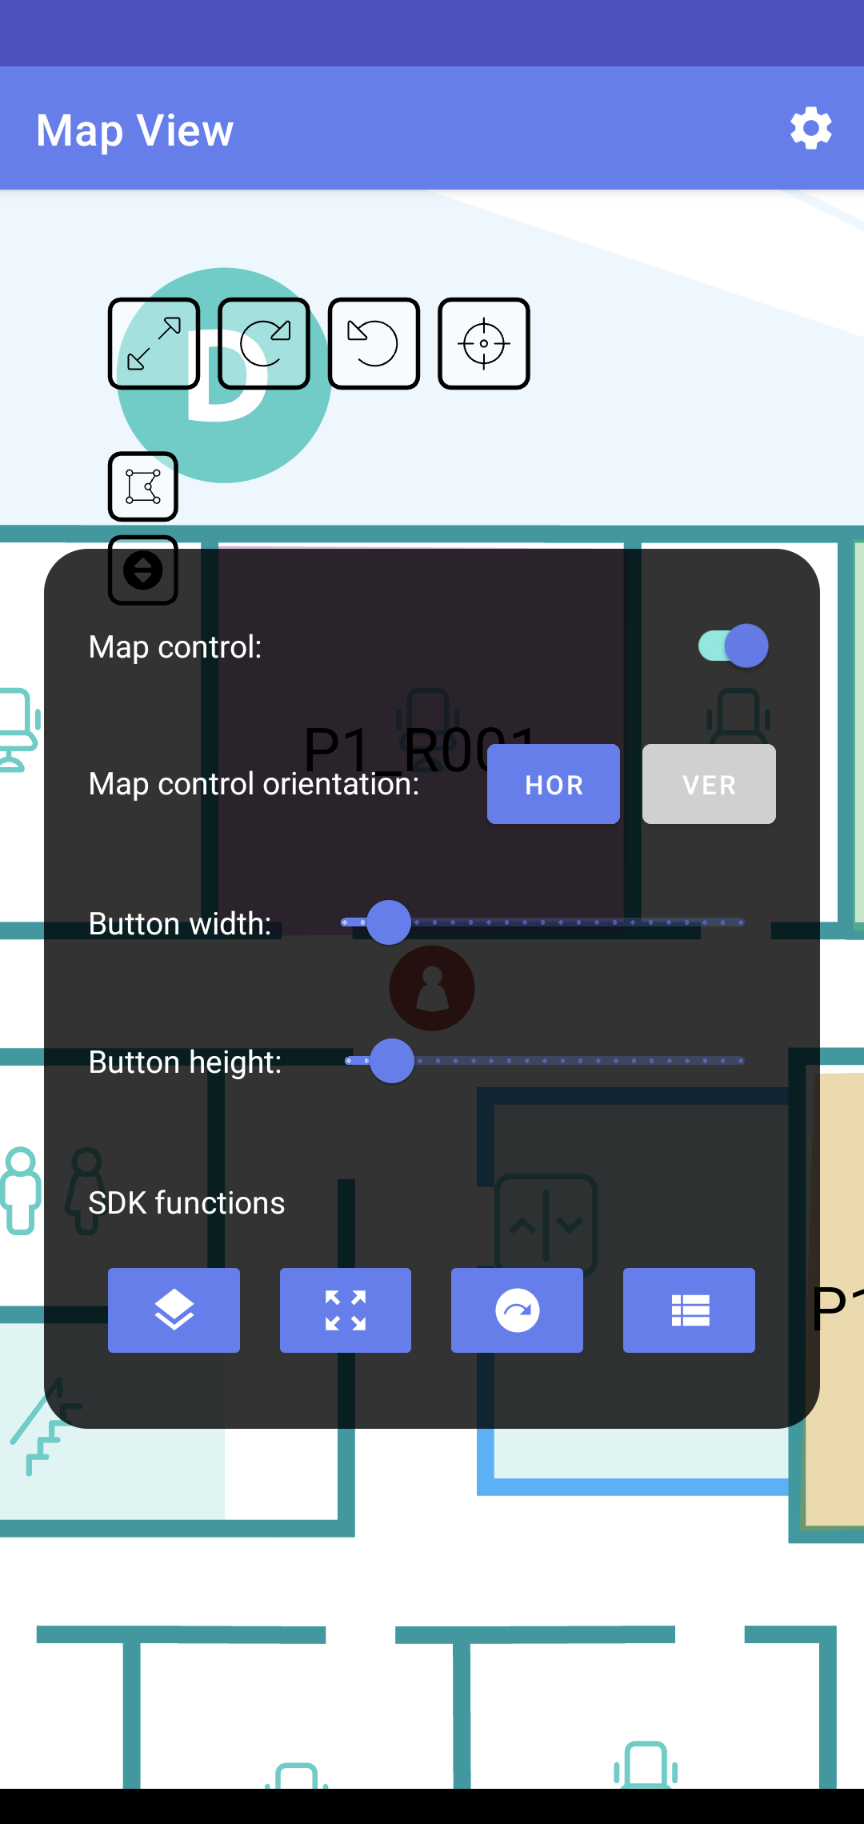 Toolbox GUI for map view